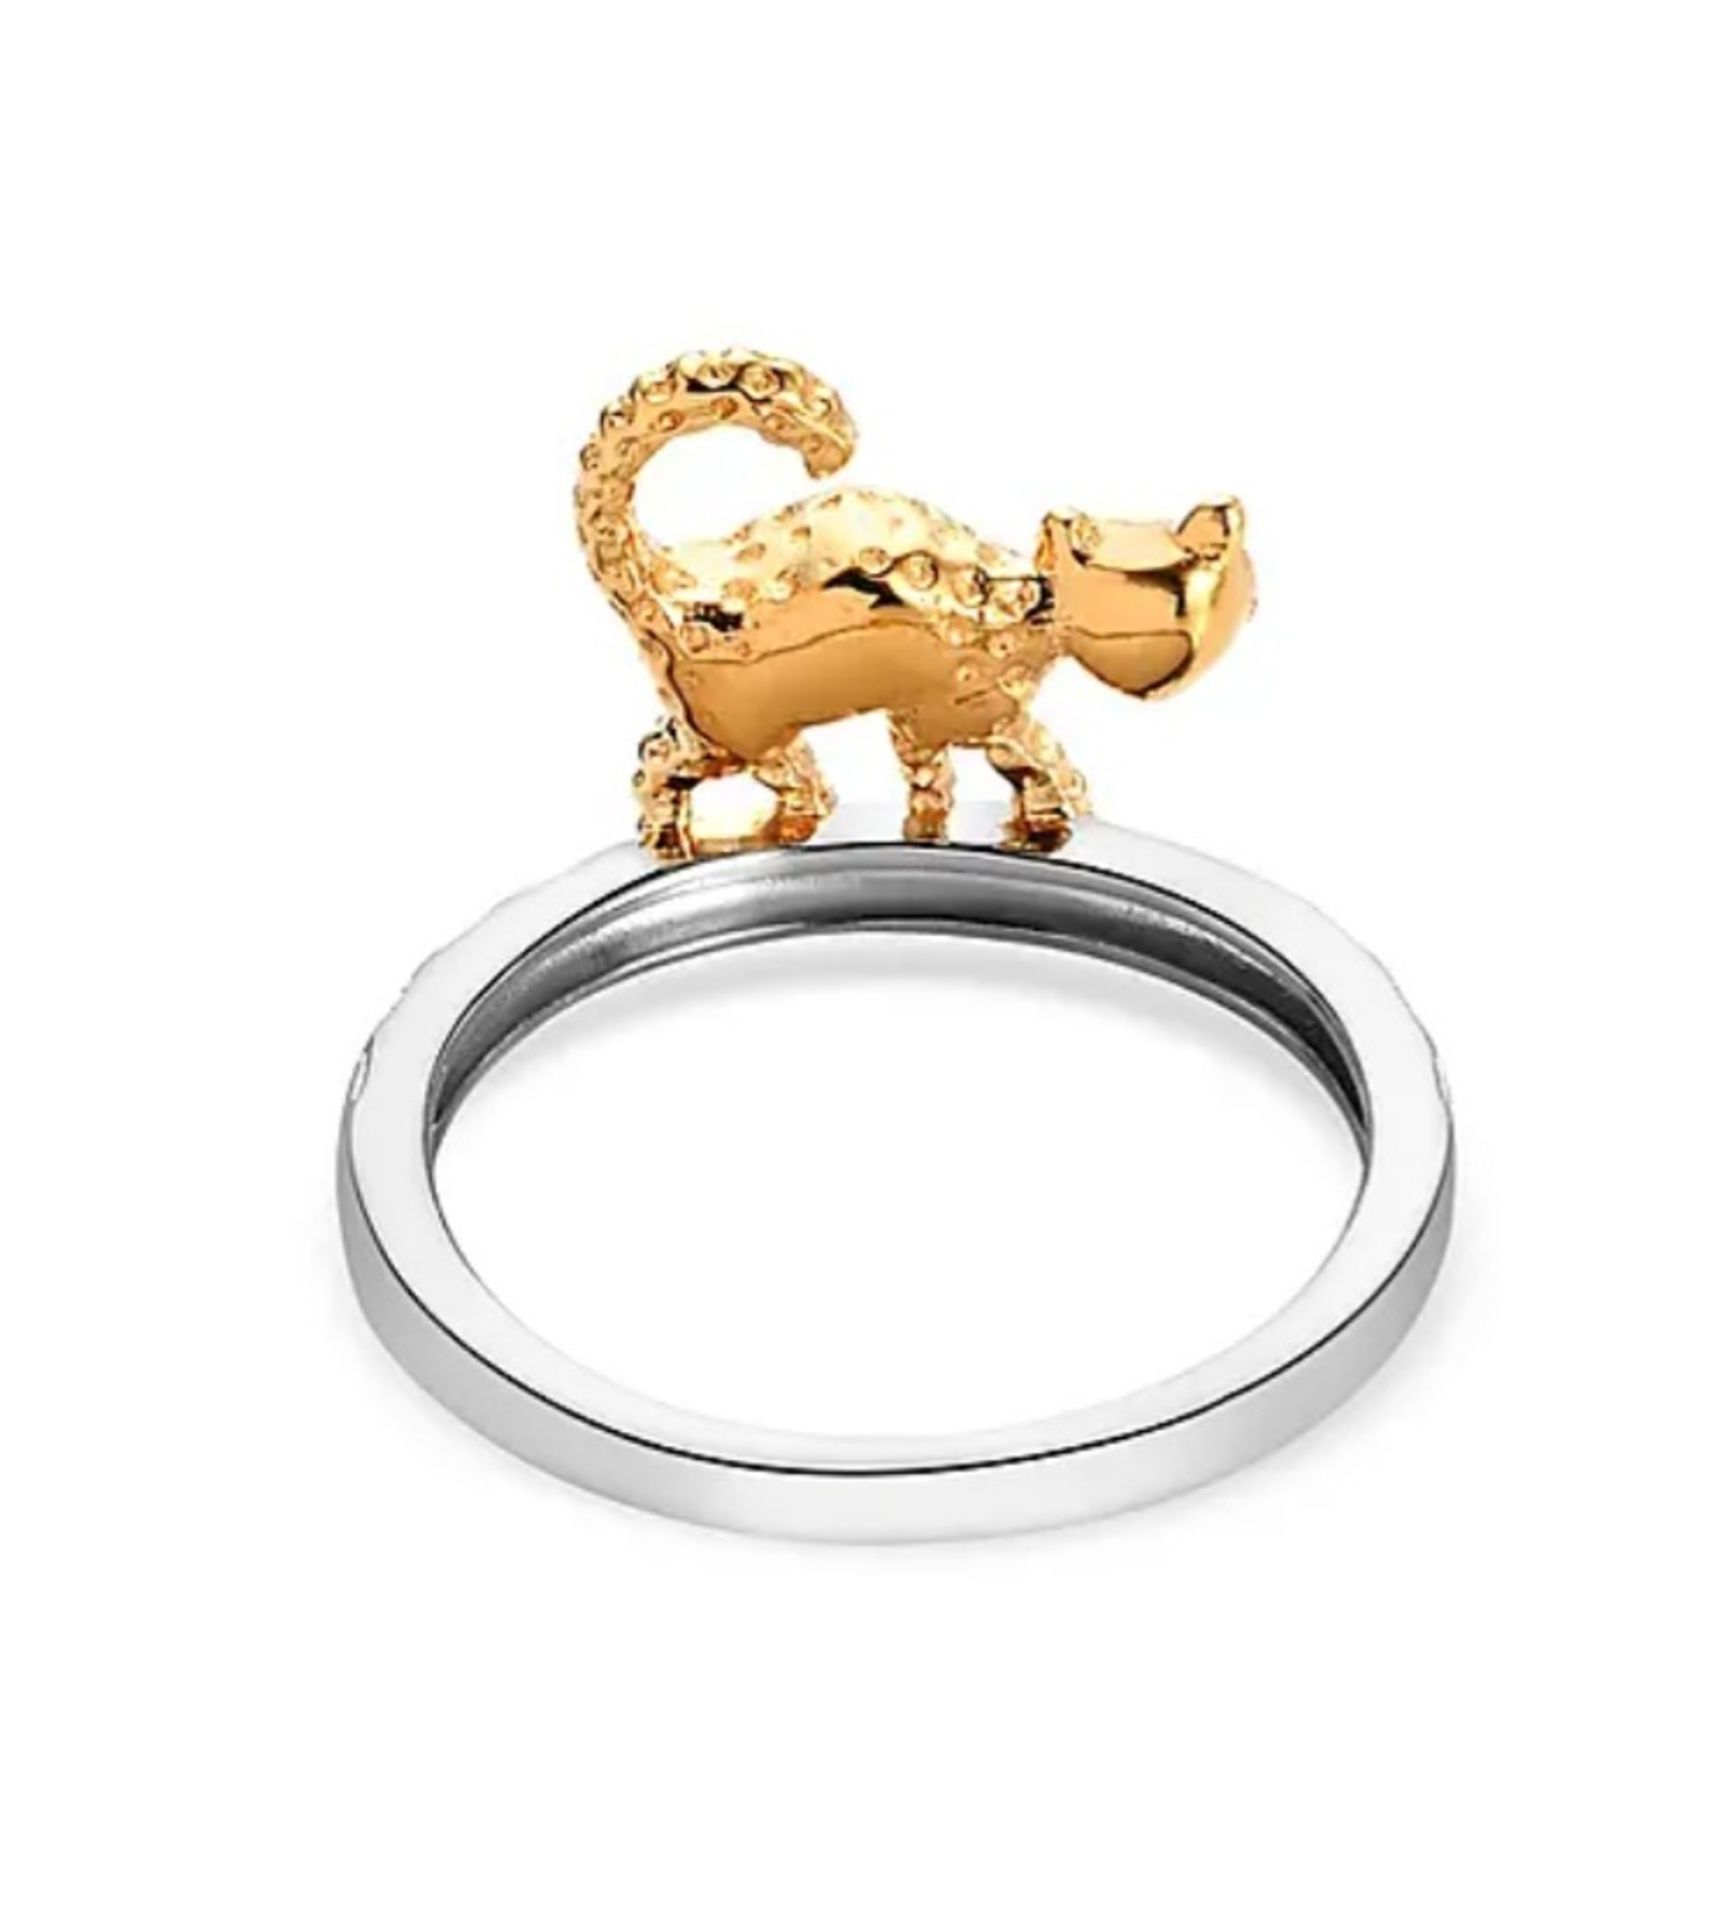 NEW! Platinum and Gold Overlay Sterling Silver Cat Band Ring - Image 5 of 5